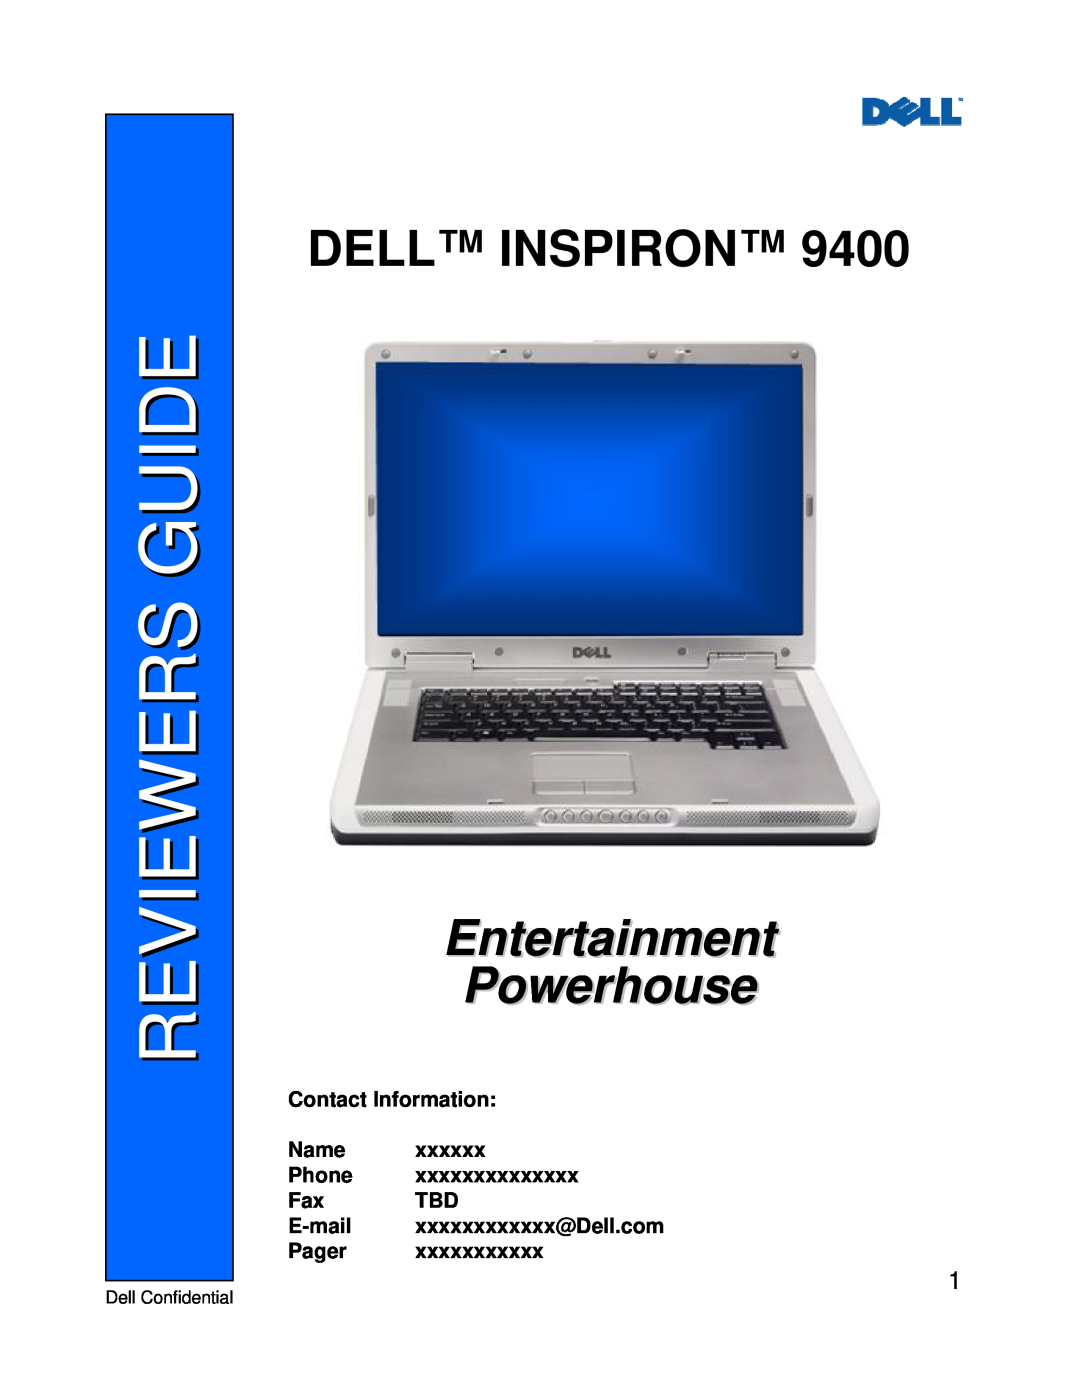 Dell 9400 manual Reviewers Guide, Dell Inspiron, Entertainment Powerhouse, Contact Information, Name, xxxxxx, Phone, Pager 